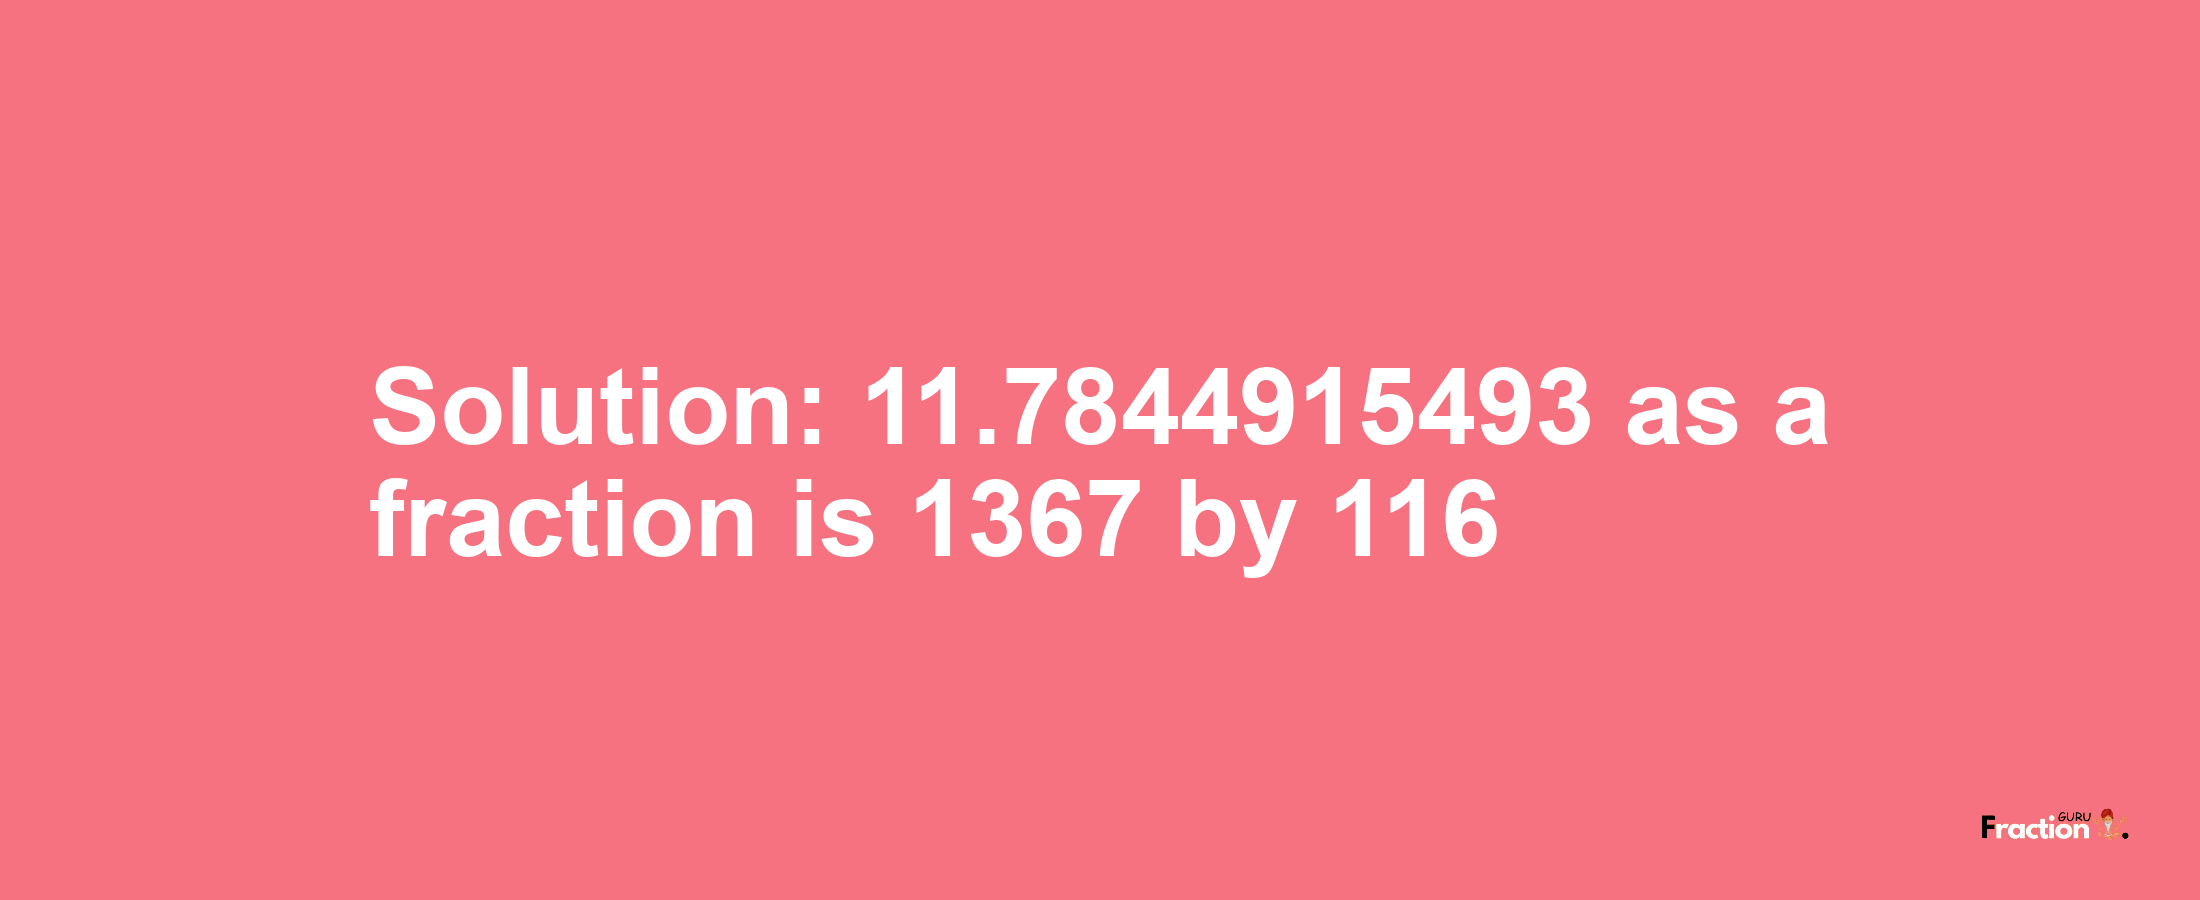 Solution:11.7844915493 as a fraction is 1367/116